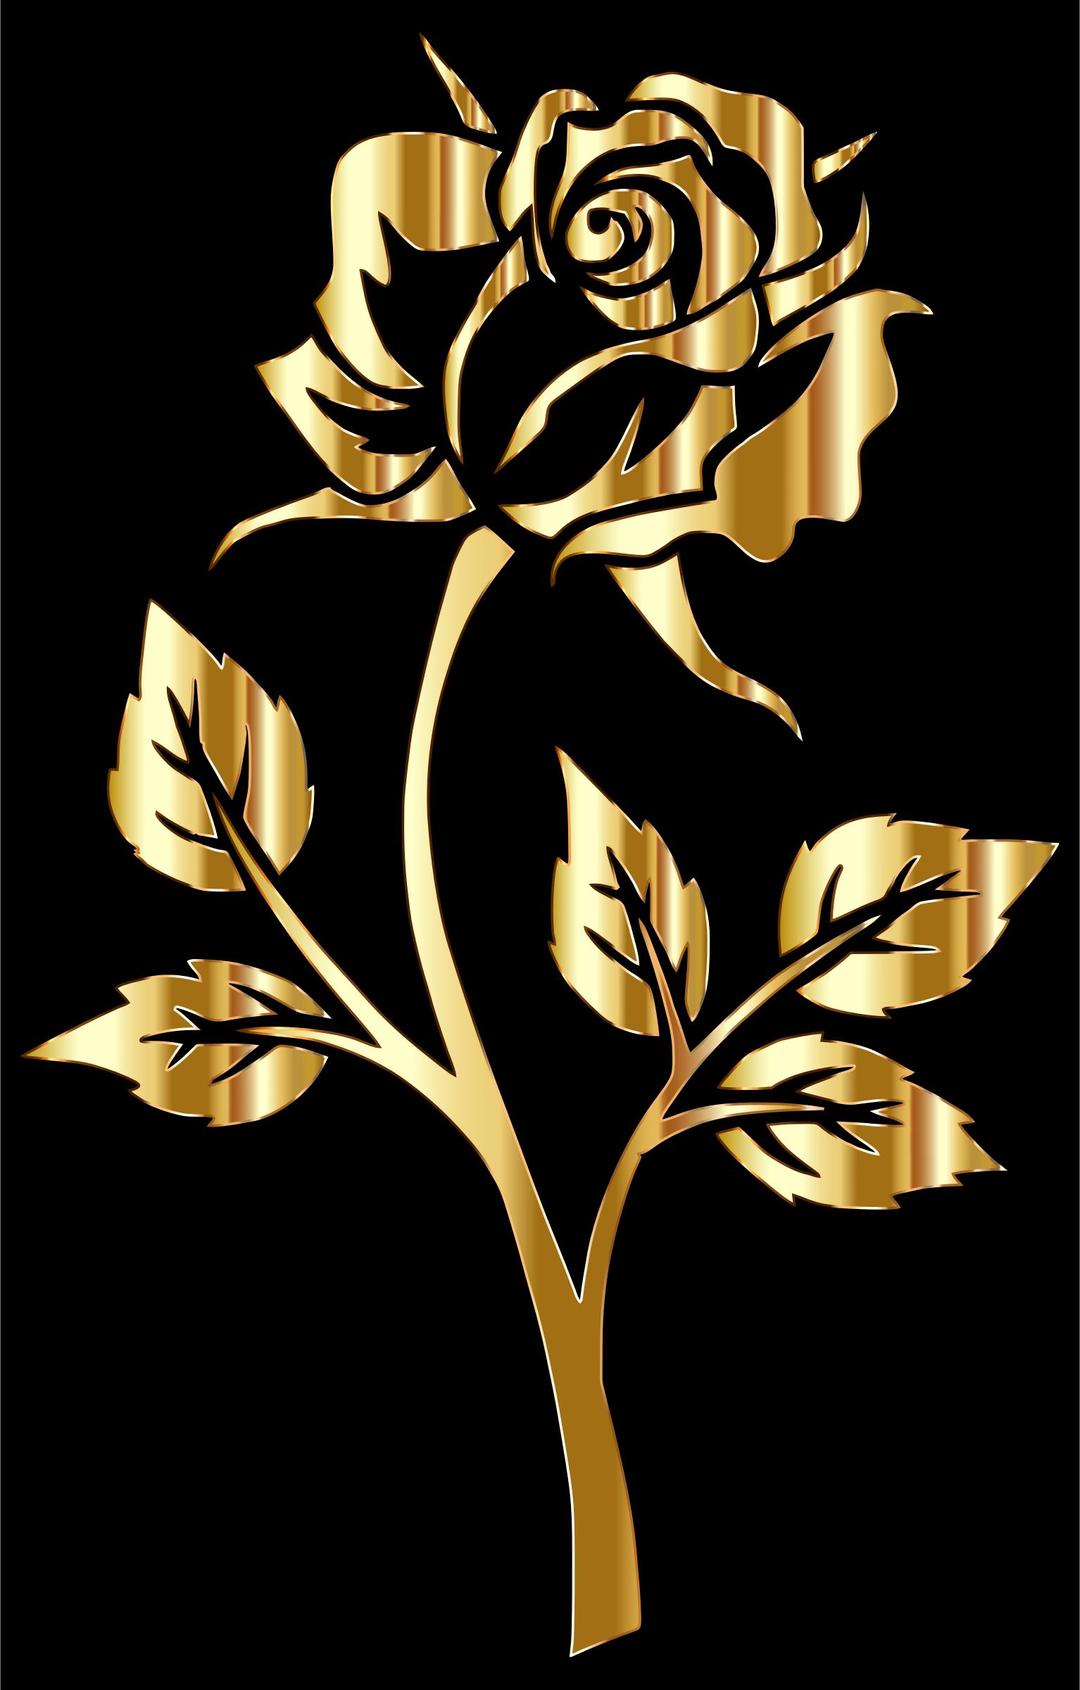 Gold Rose Silhouette png transparent